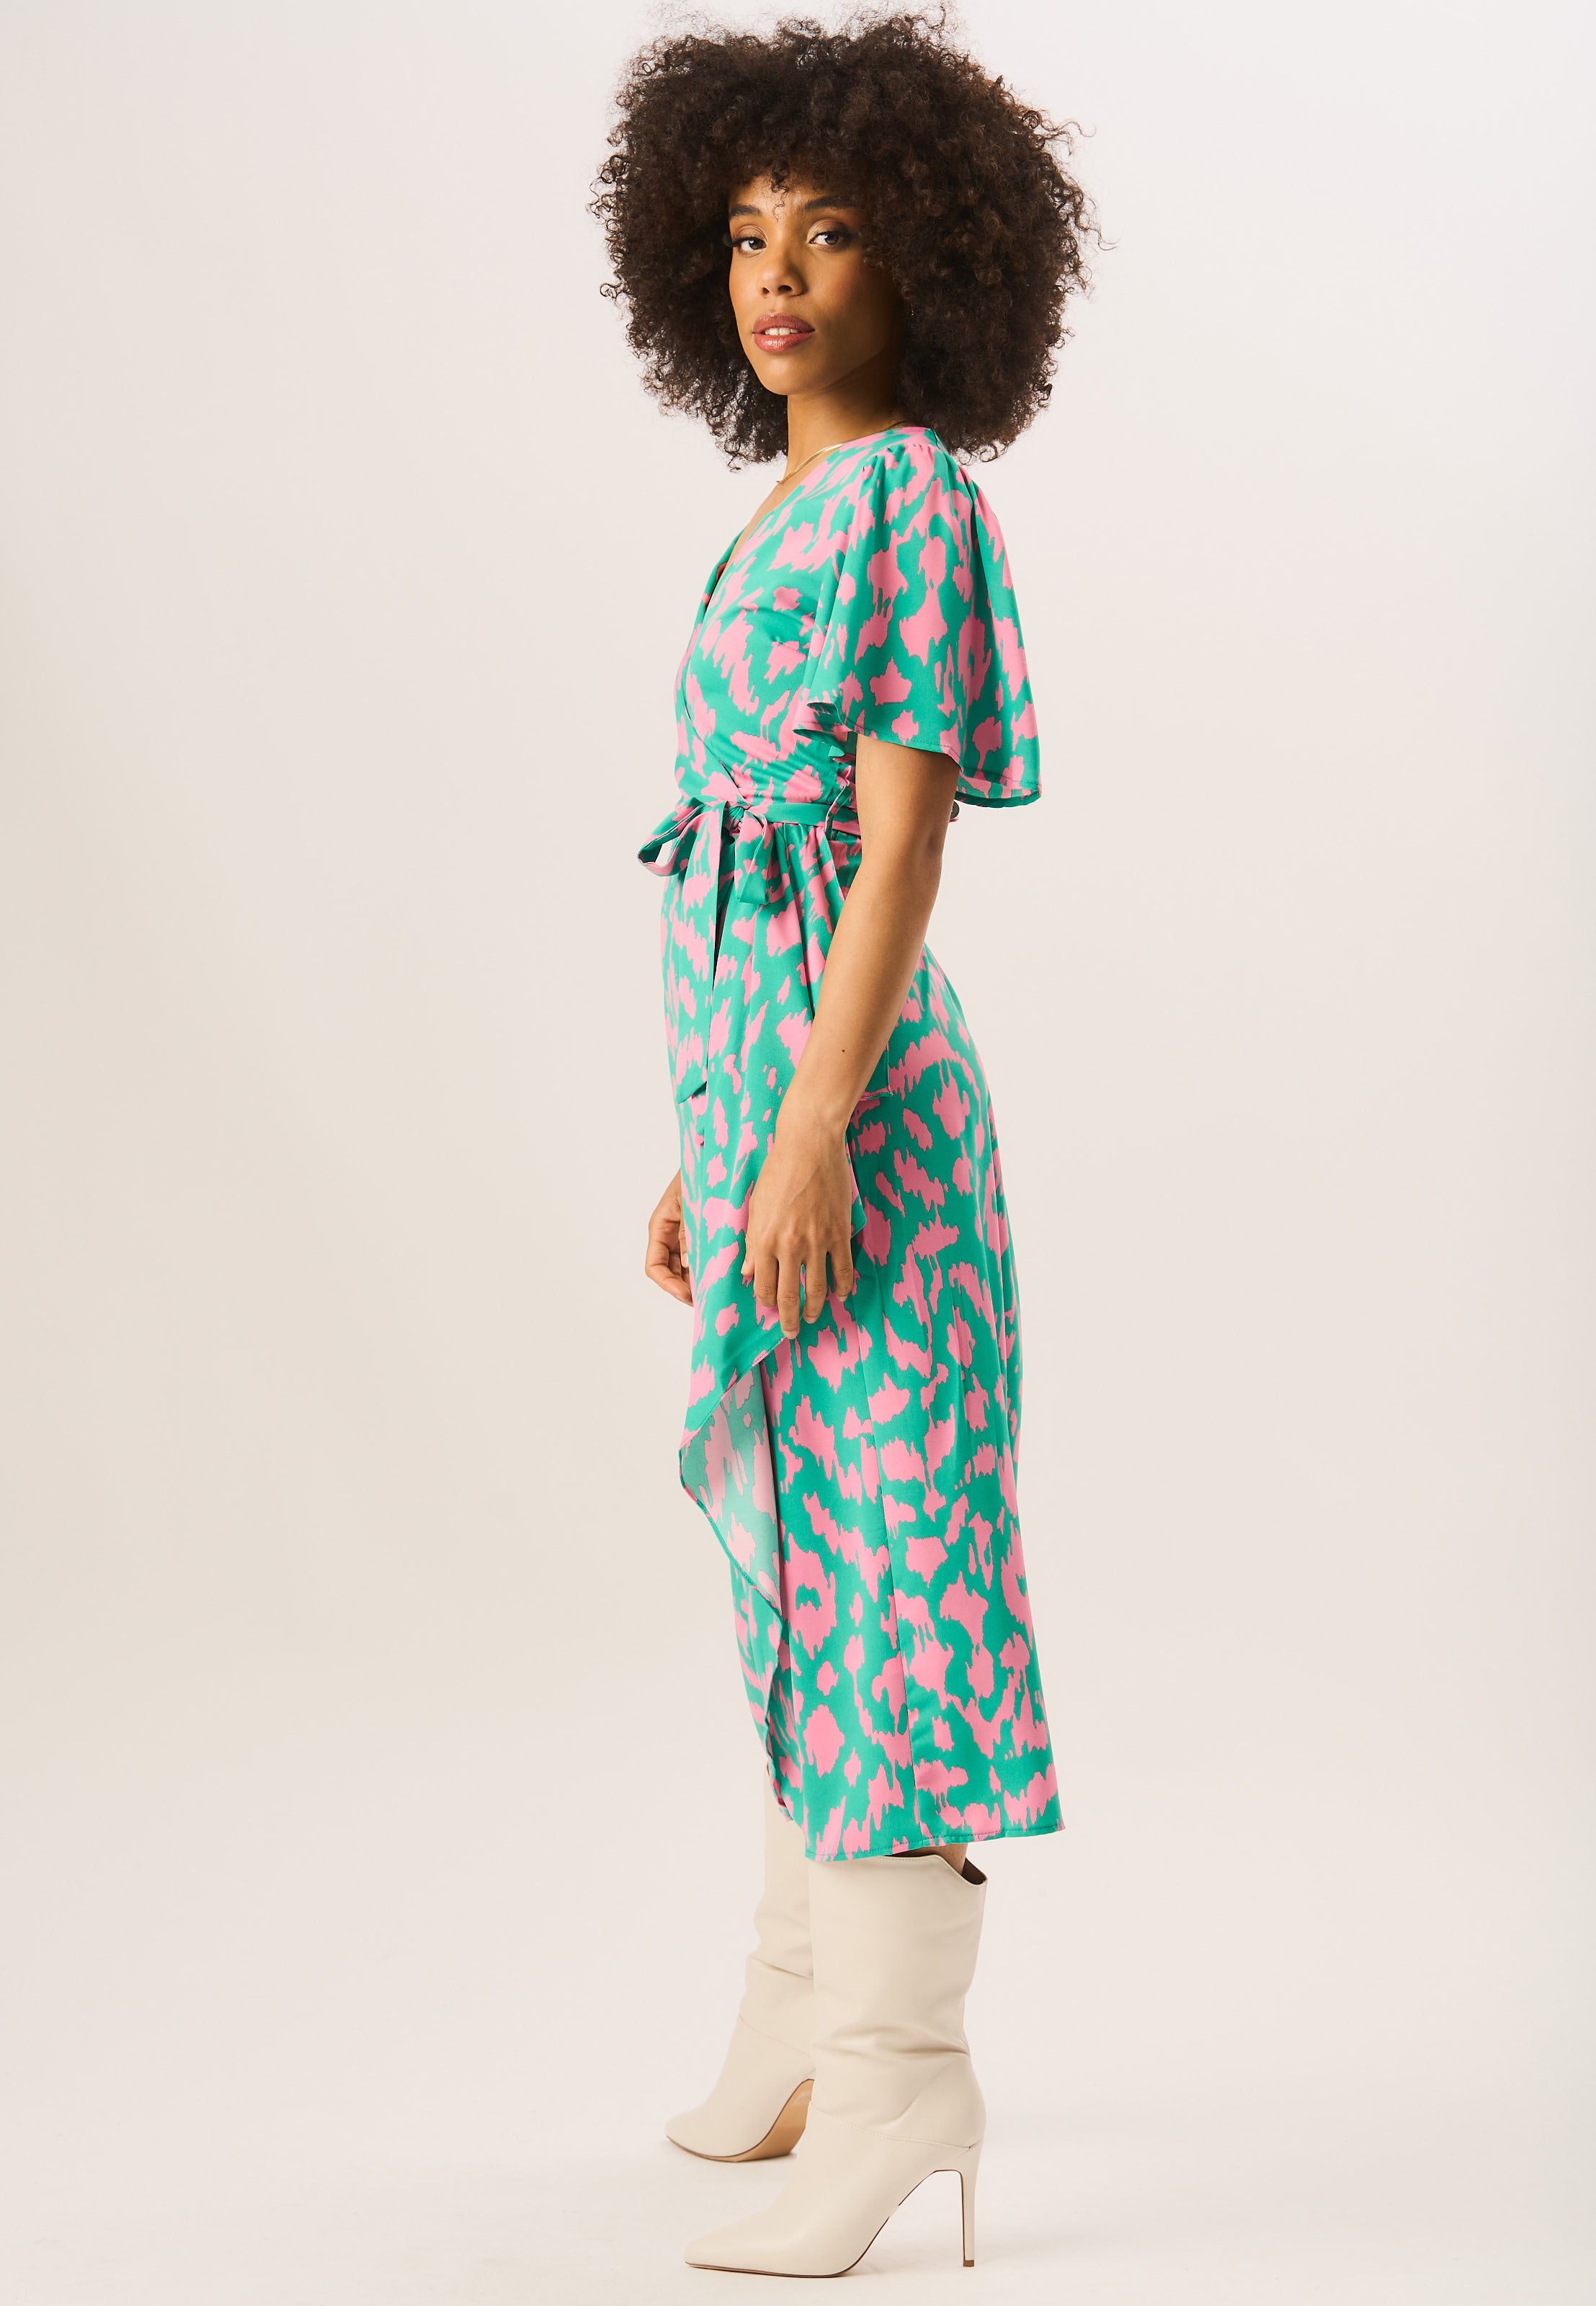 Green Abstract Print Belted Wrap Dress